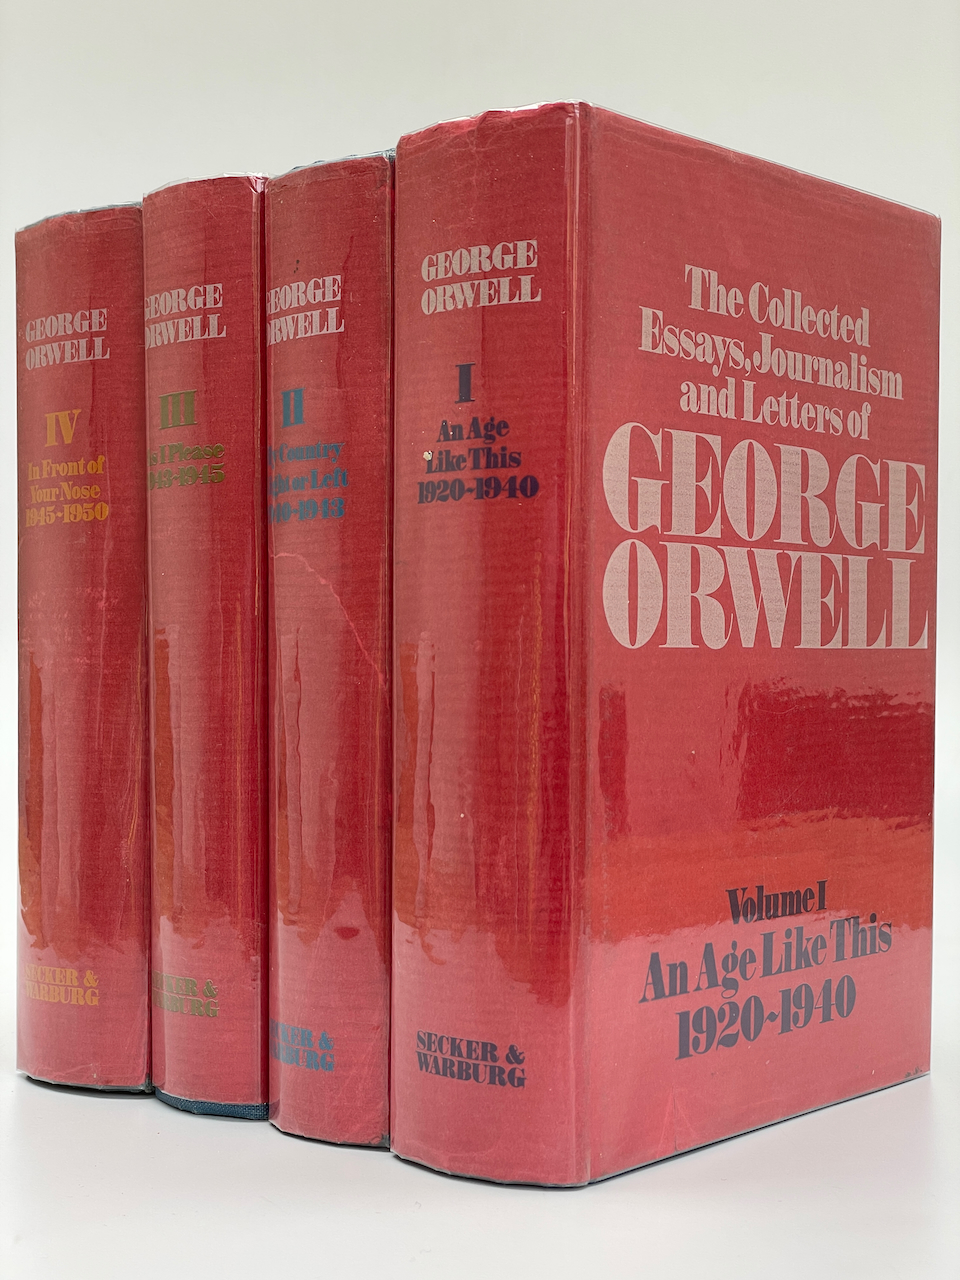 the collected essays journalism and letters of george orwell pdf